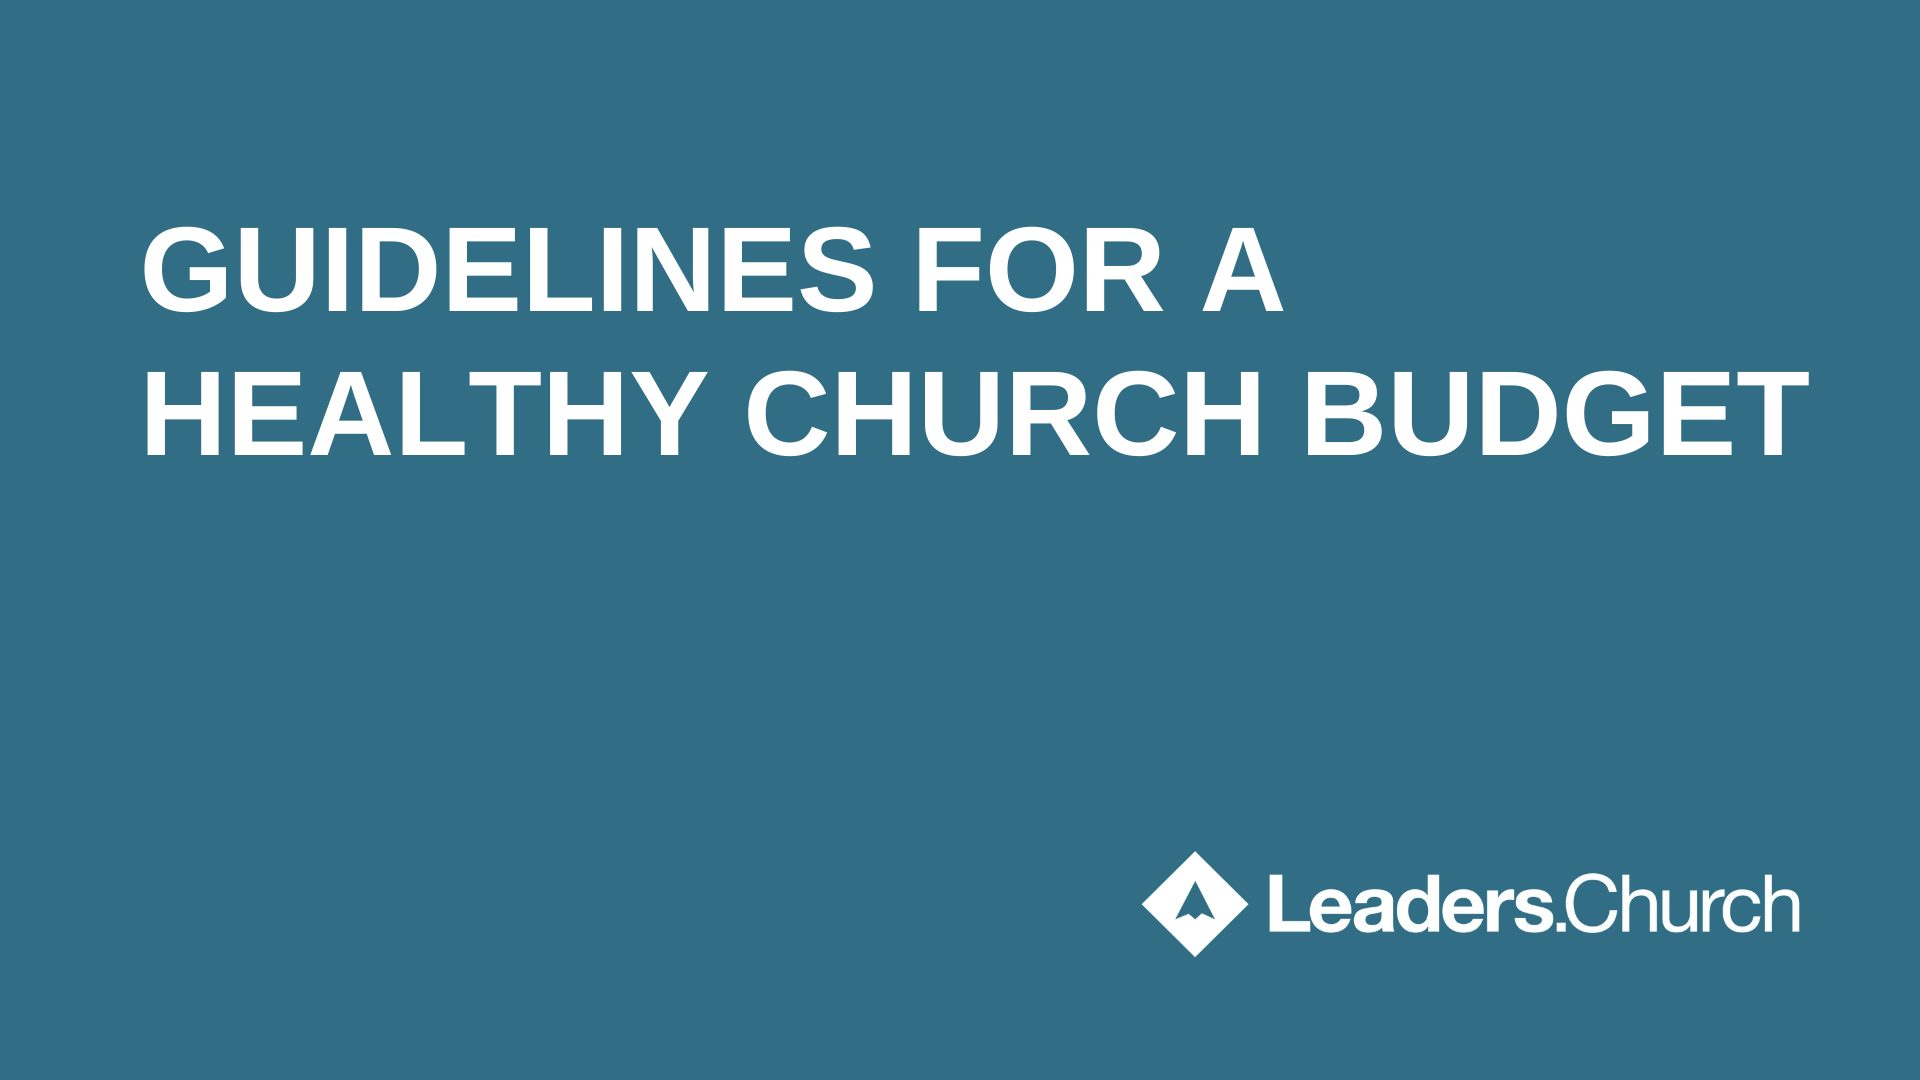 Text "GUIDELINES FOR A HEALTHY CHURCH BUDGET" blue background Leaders.Church